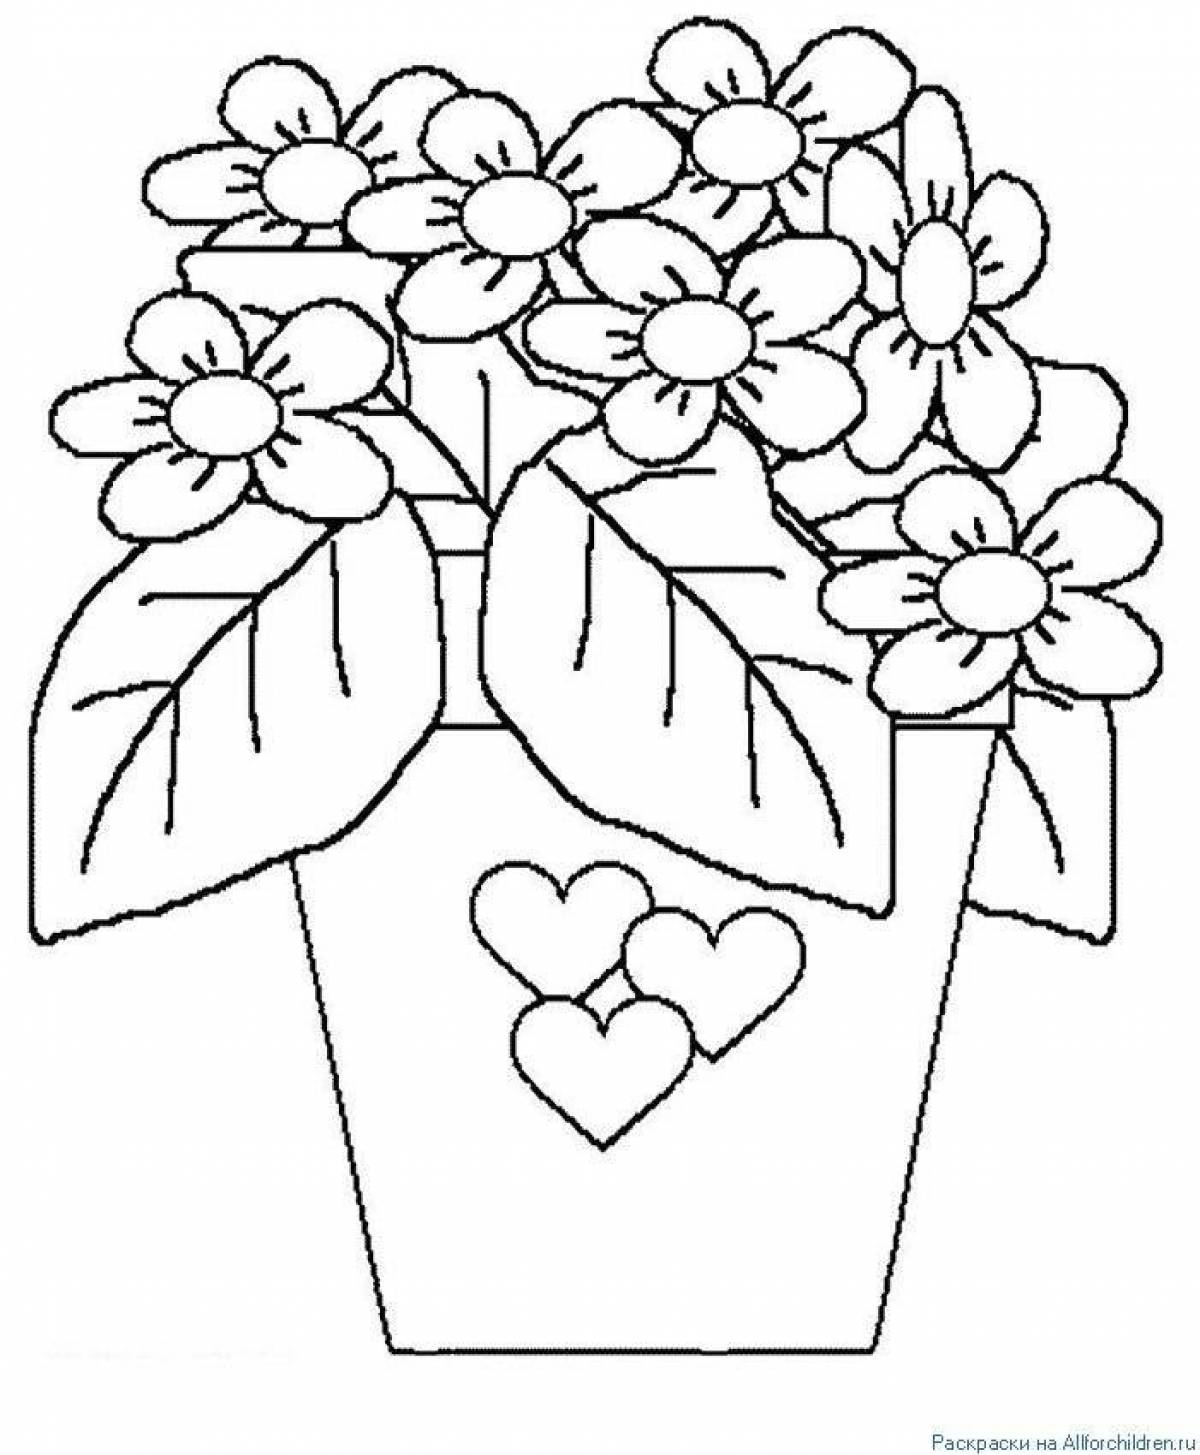 Awesome houseplant coloring pages